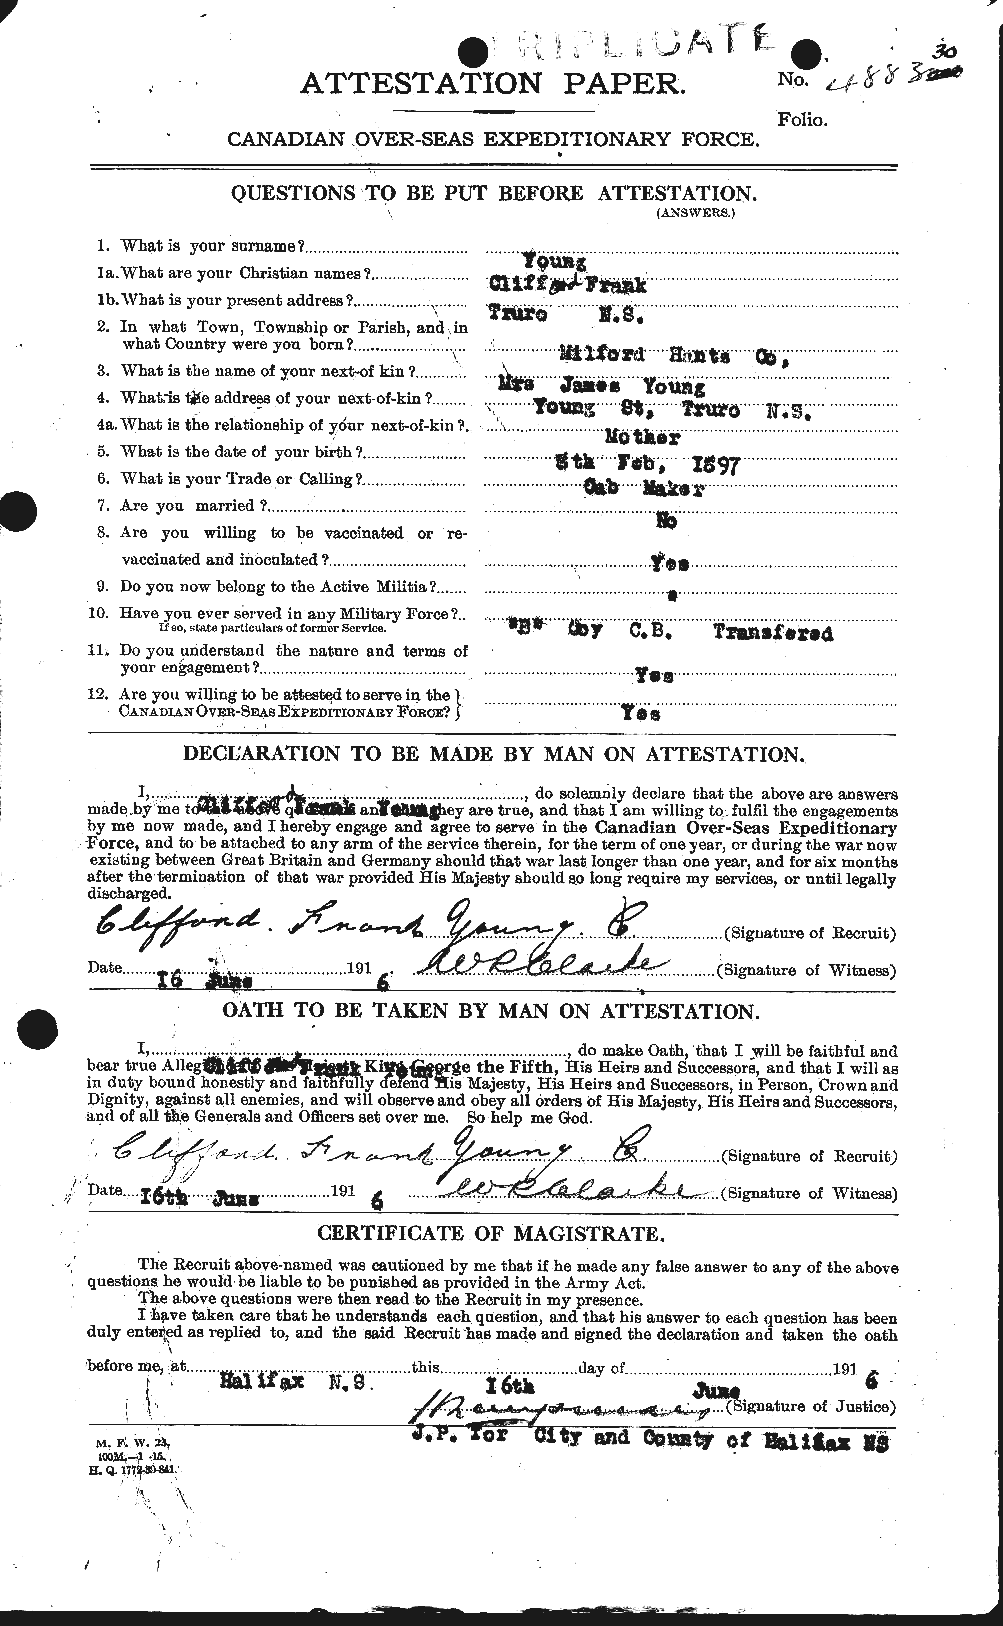 Personnel Records of the First World War - CEF 690168a